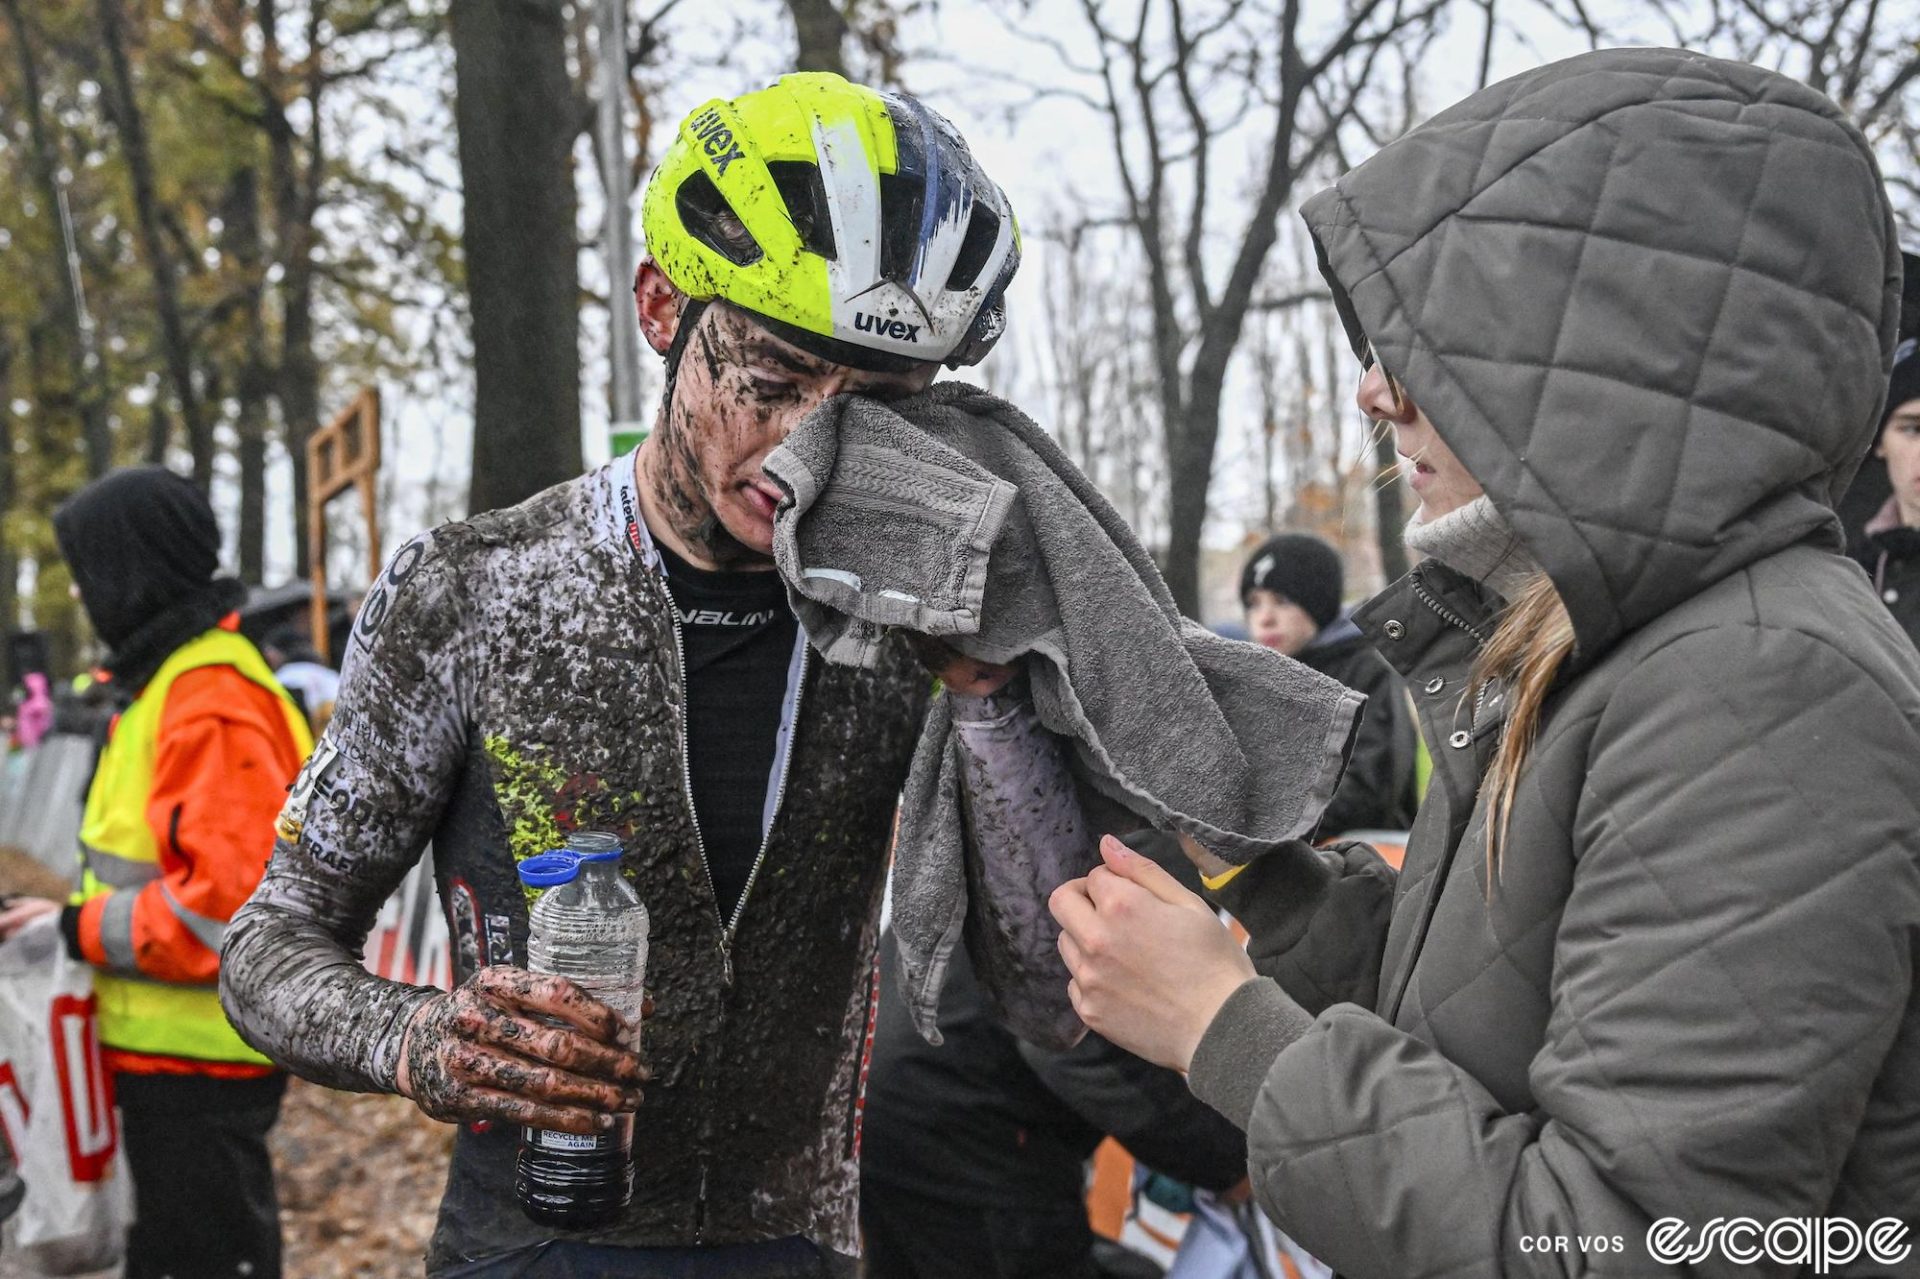 Gerben Kuypers wipes mud from his face with a towel handed to him by a woman. He holds a water bottle in front of his filthy, unzipped skinsuit.